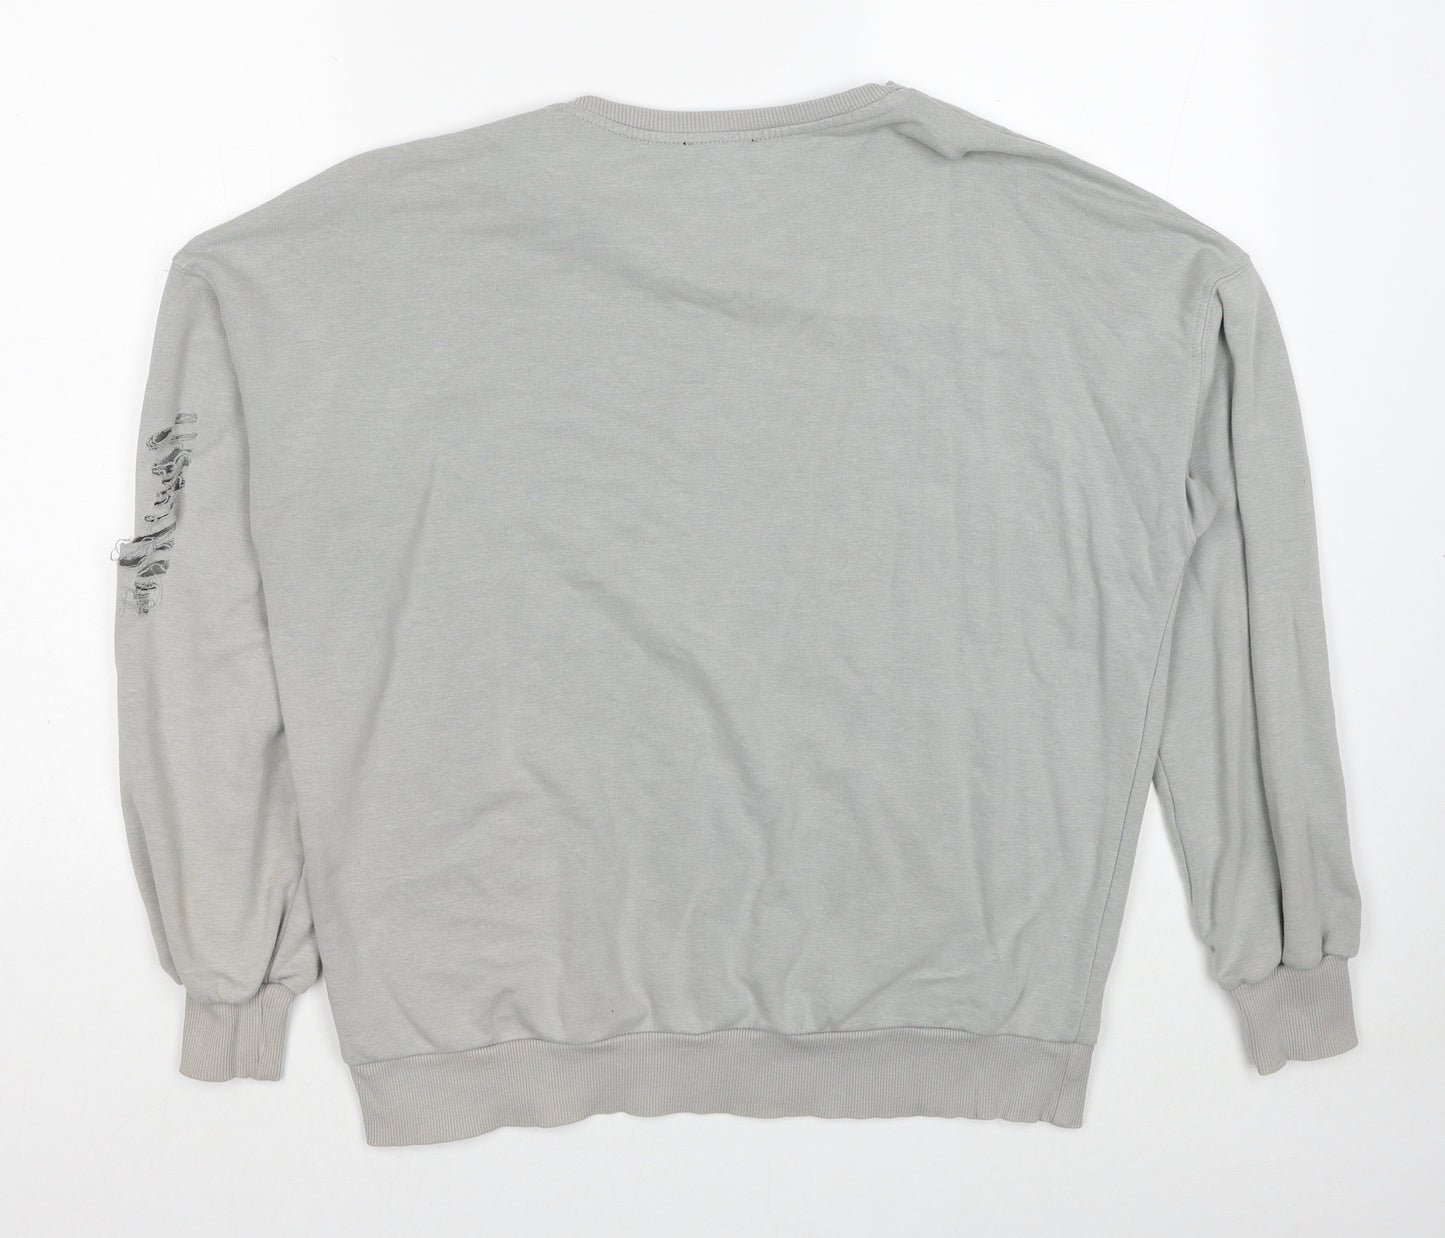 New Look Mens Grey Cotton Pullover Sweatshirt Size S - Distressed